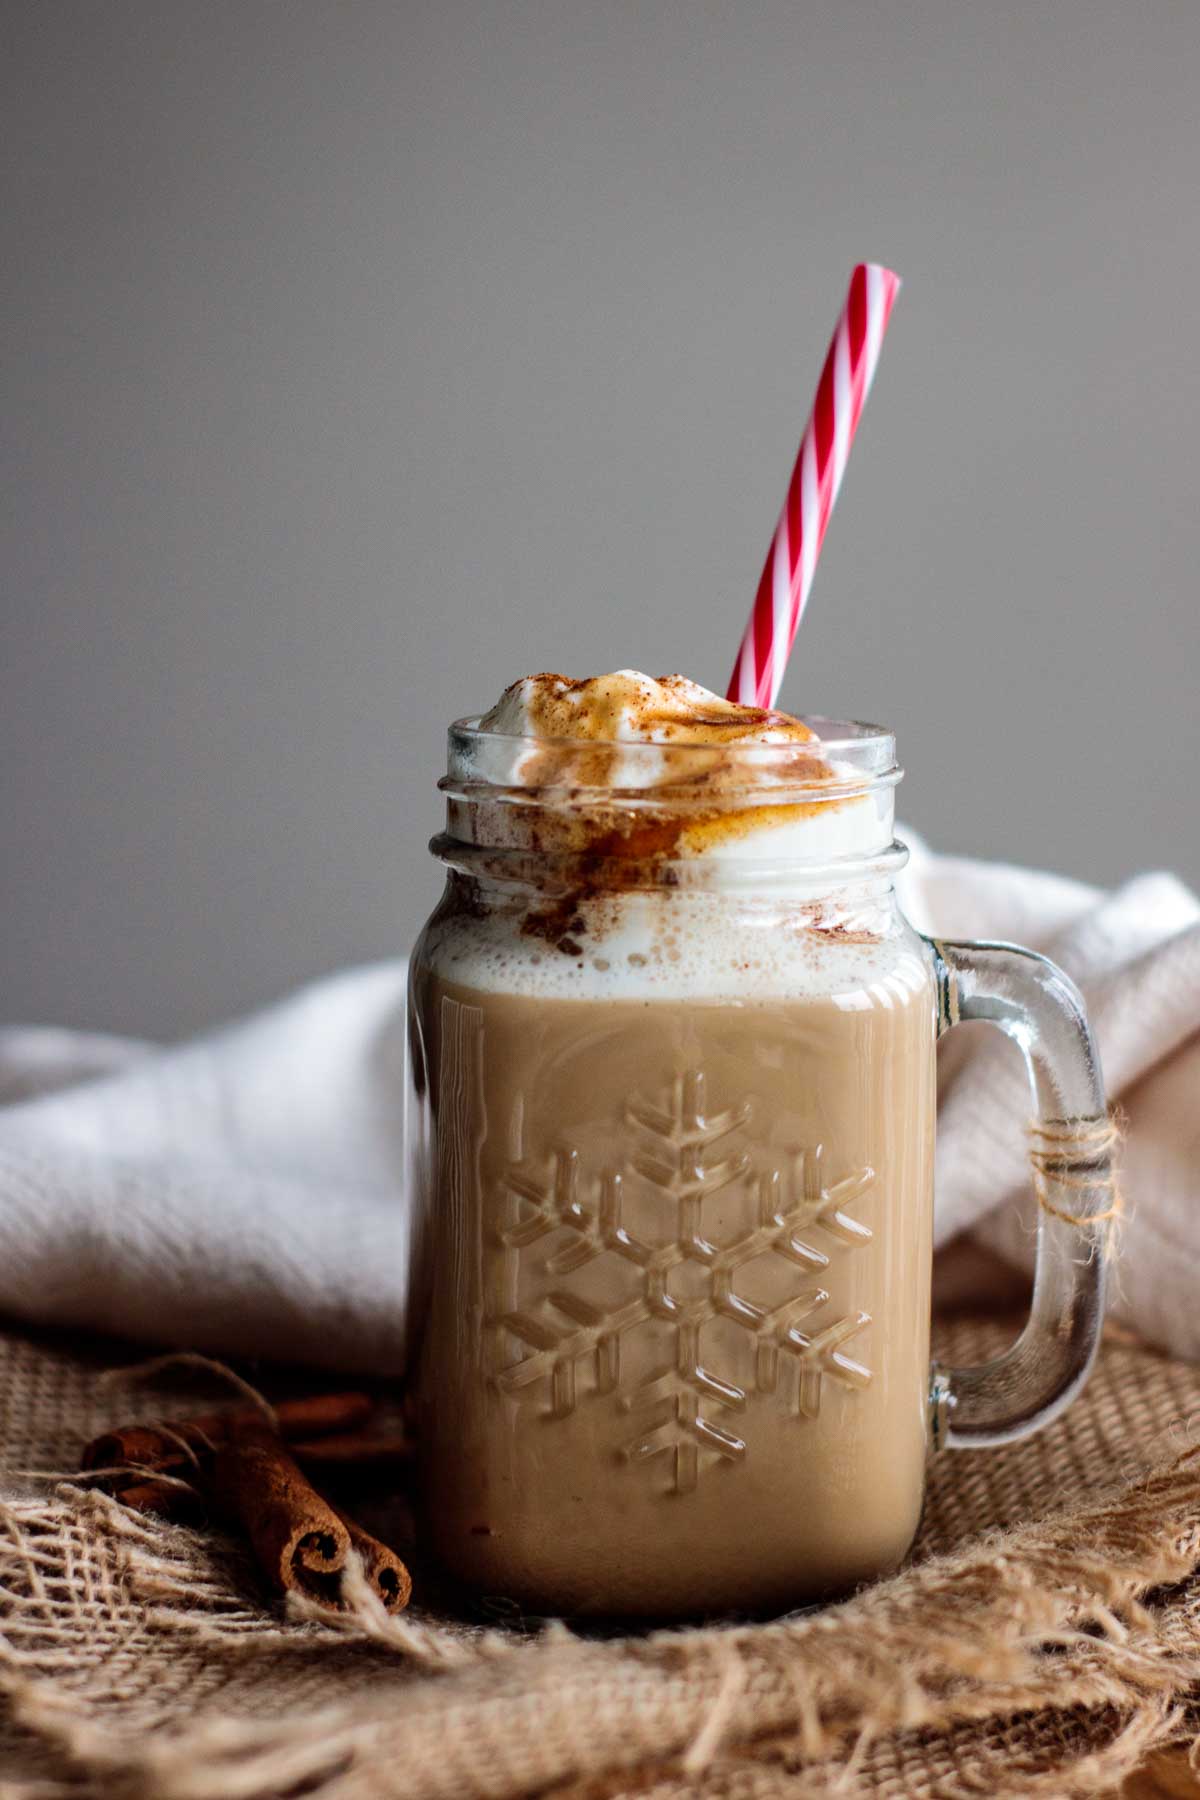 starbucks copycat of the famous cinnamon dolce latte, with a red reusable straw and cinnamon syrup topping the whipped cream